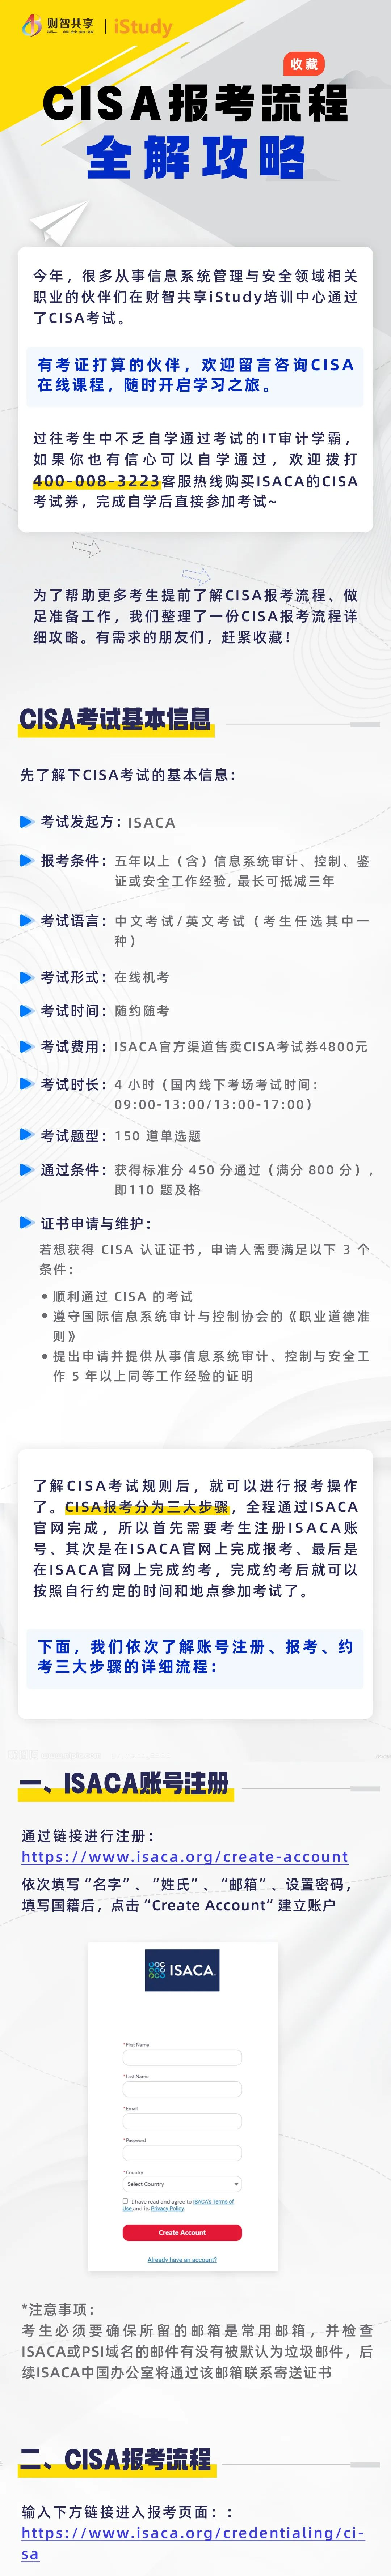 https://client-download-pre.obs.cn-north-4.myhuaweicloud.com/official/pro/846634069021298688.png